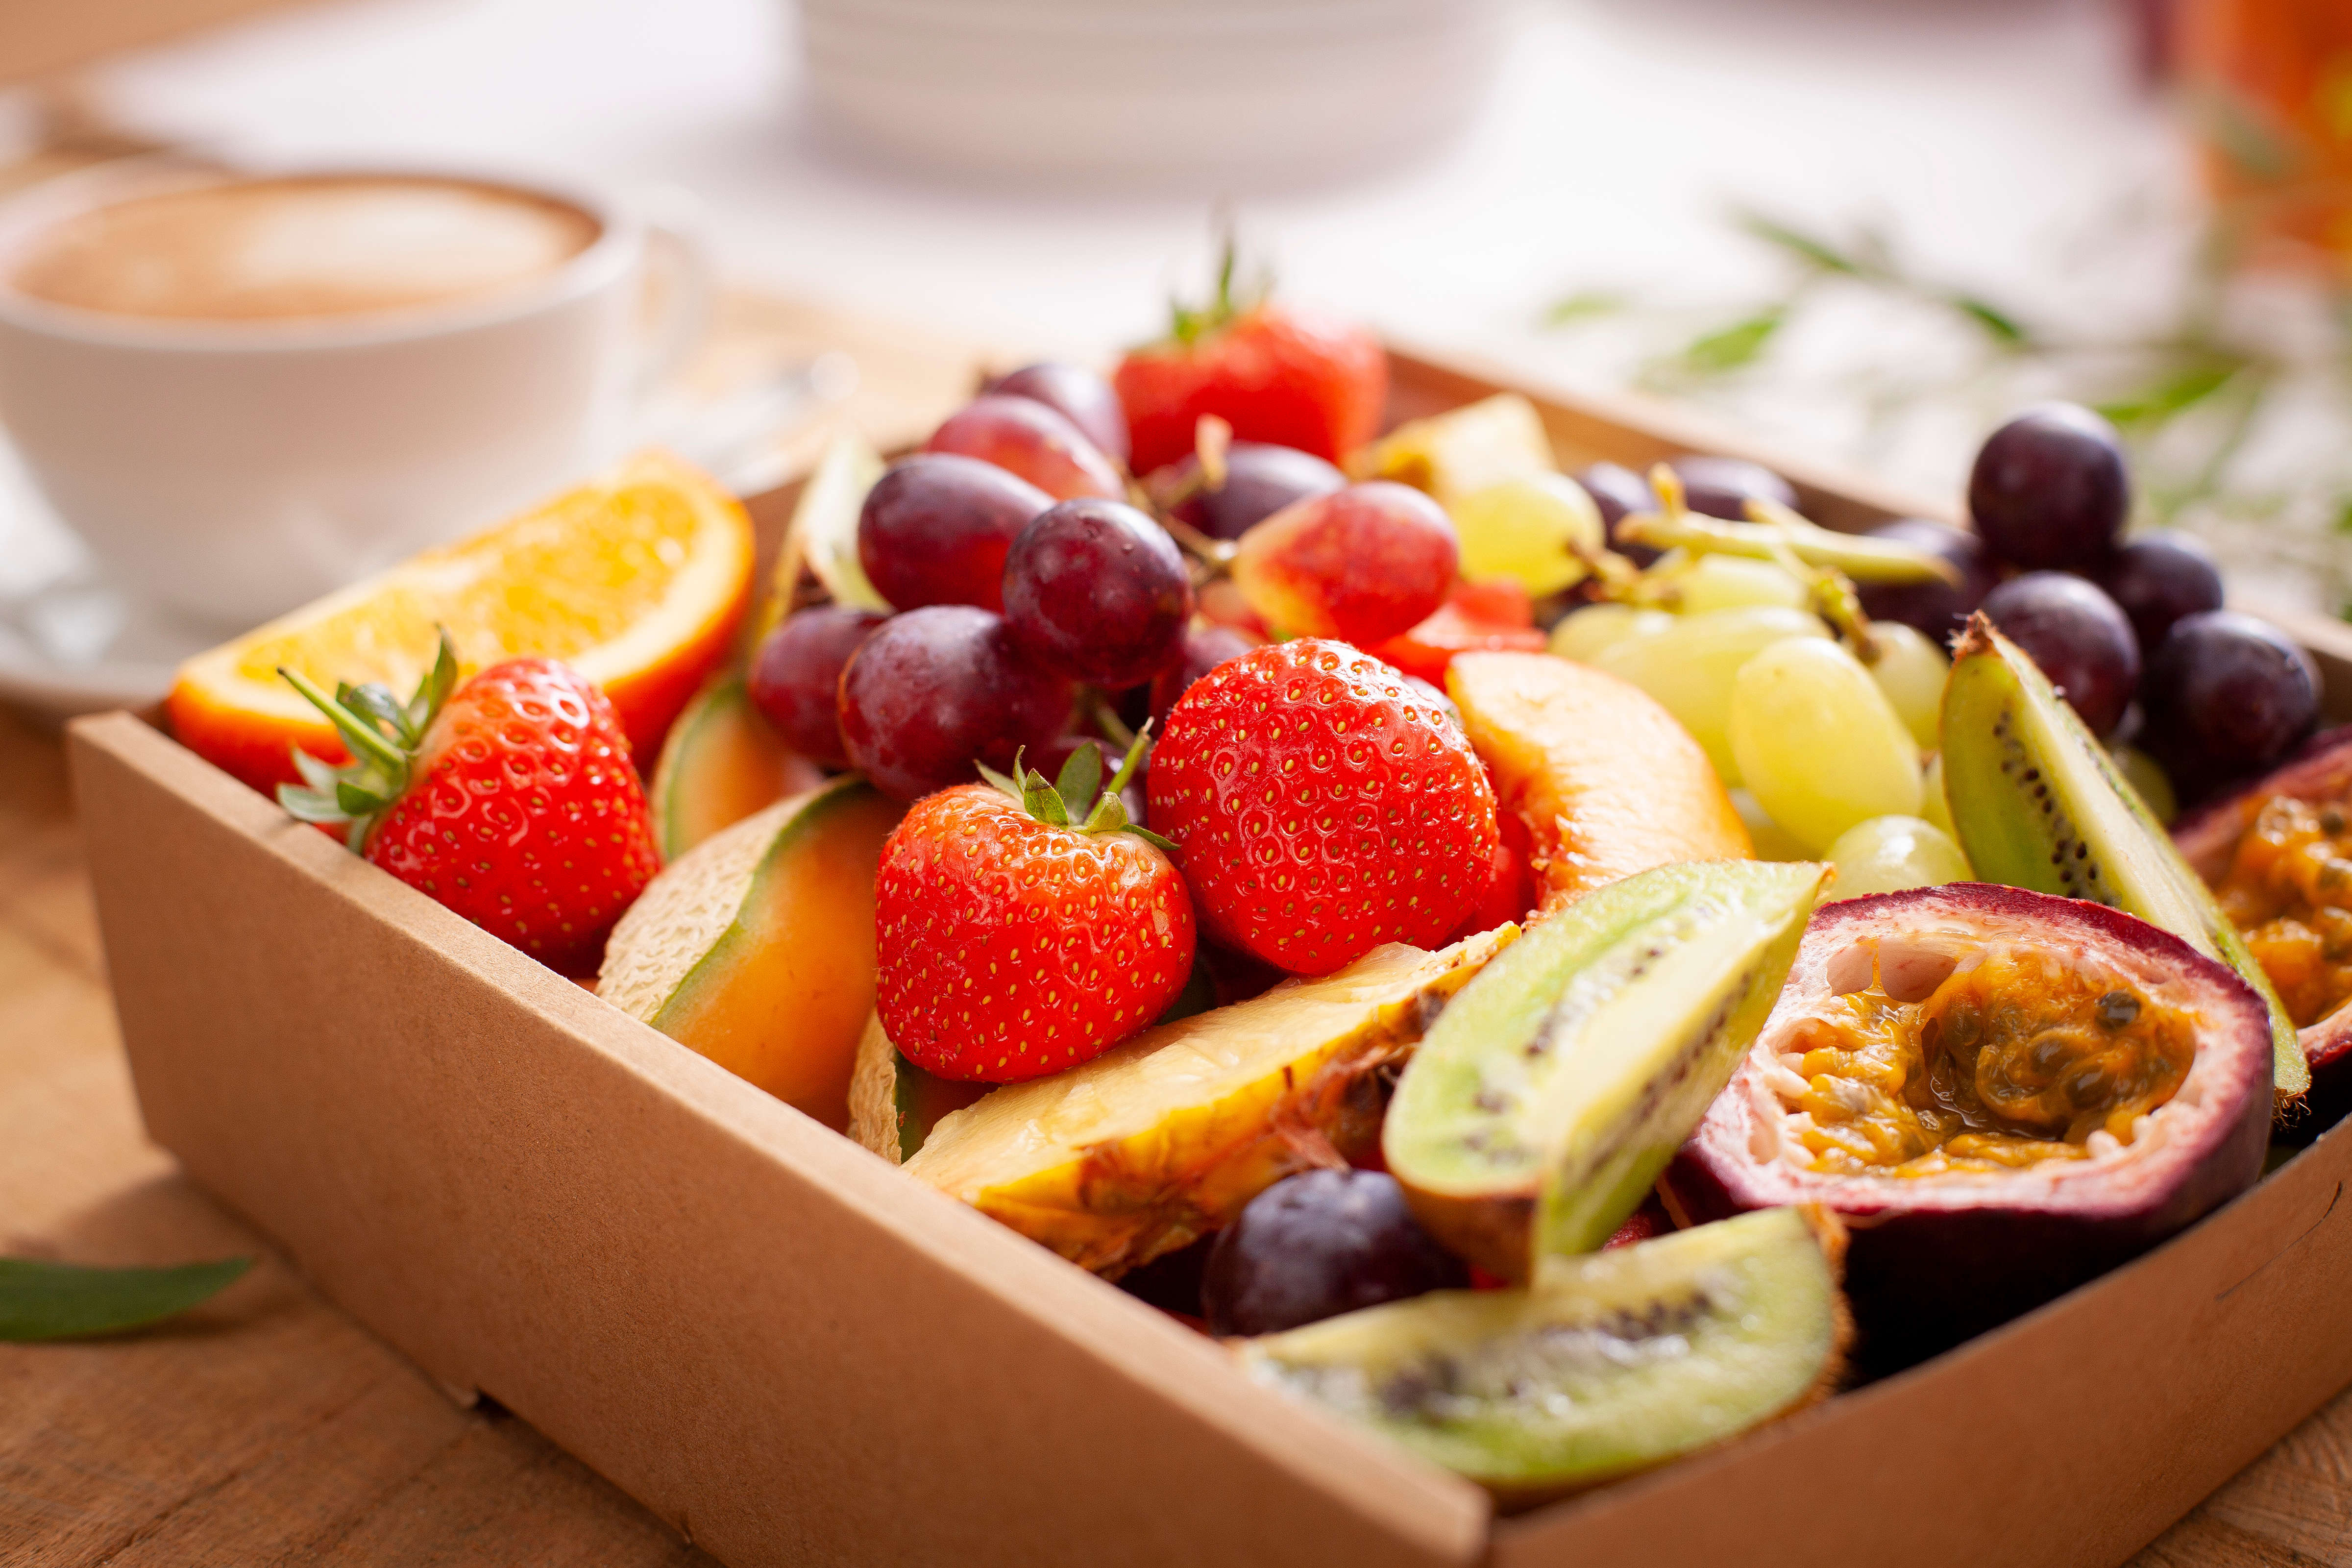 Close uo of Fresh seasonal fruit catering box. Box pictured includes orange wedges, strawberries, red and green grapes, passionfruit halves, kiwifruit wedges, peach slices pineapple slices, and rockmelon pieces. Photo: Richard Jupe.